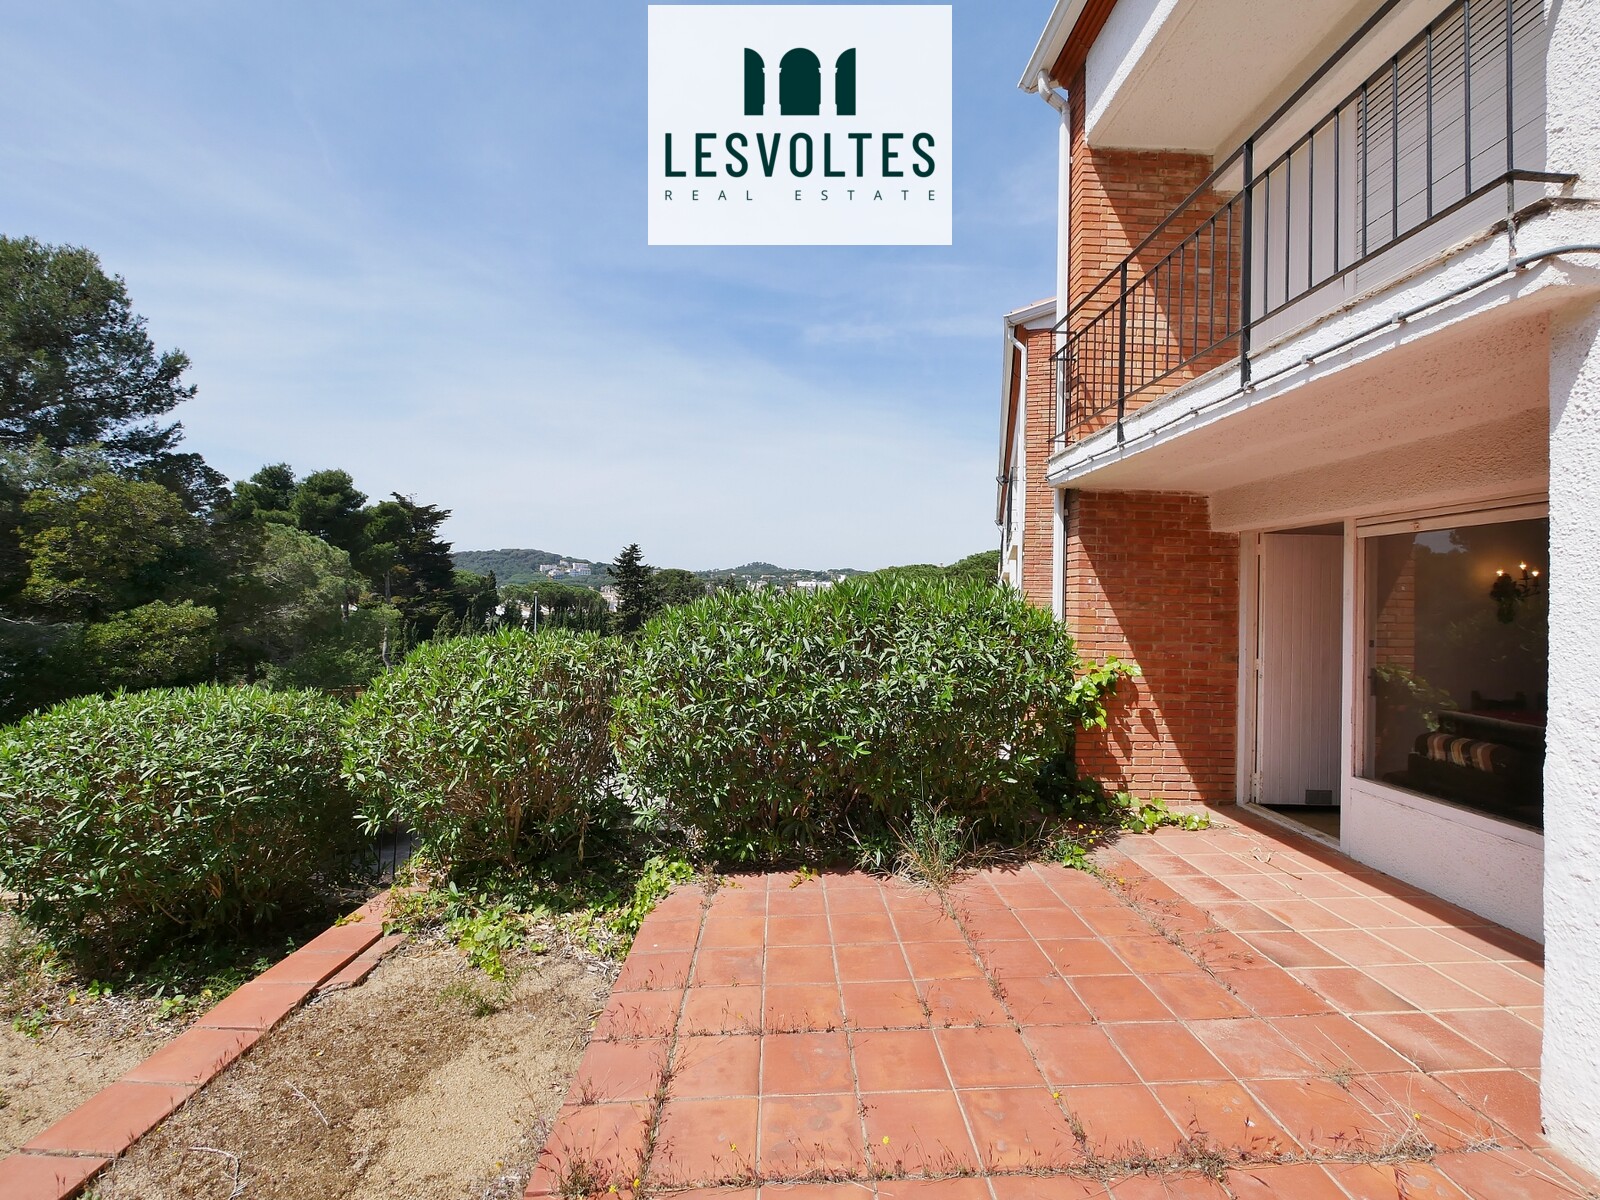 APARTMENT WITH PRIVATE GARDEN AND PARKING SPACE 200 METERS FROM THE BEACH IN CALELLA DE PALAFRUGELL.